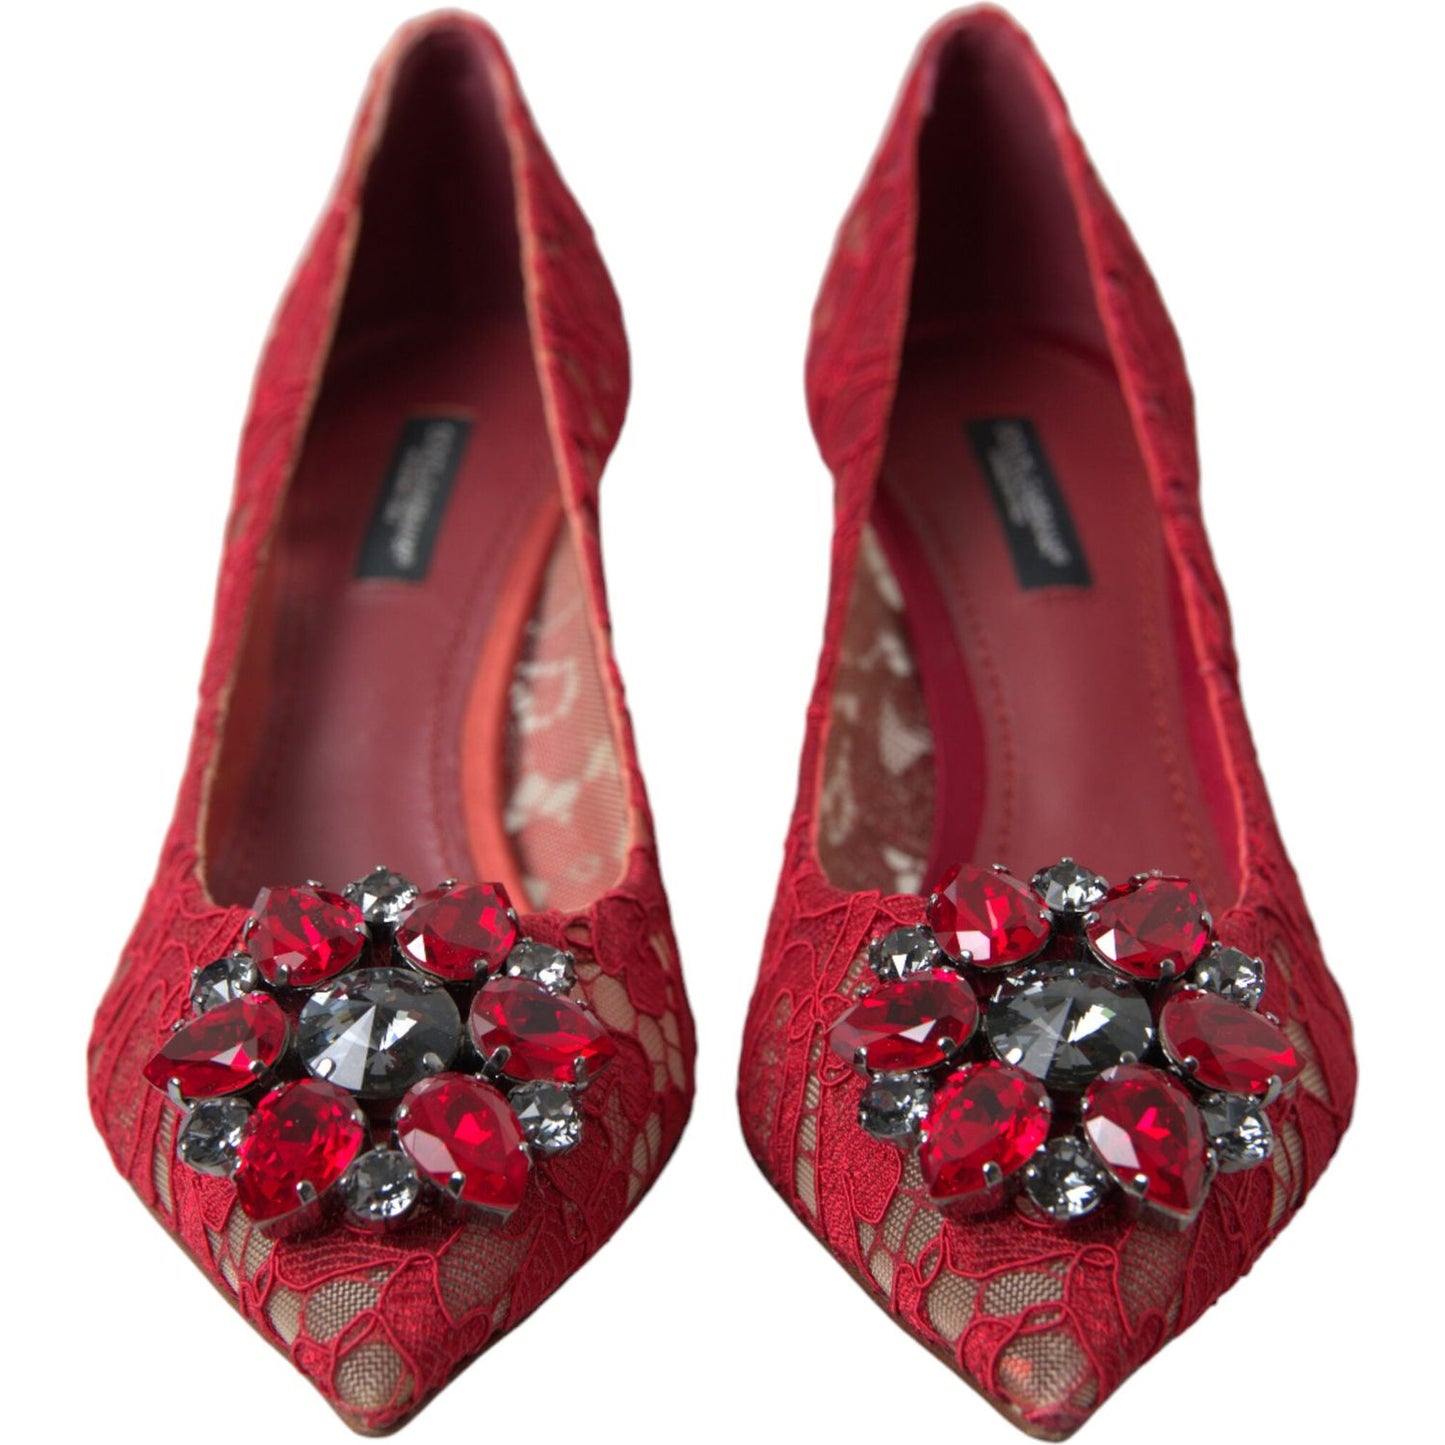 Dolce & Gabbana Radiant Red Lace Heels with Crystals red-taormina-lace-crystal-heels-pumps-shoes-2 465A9596-bg-scaled-6fb70624-0c2.jpg